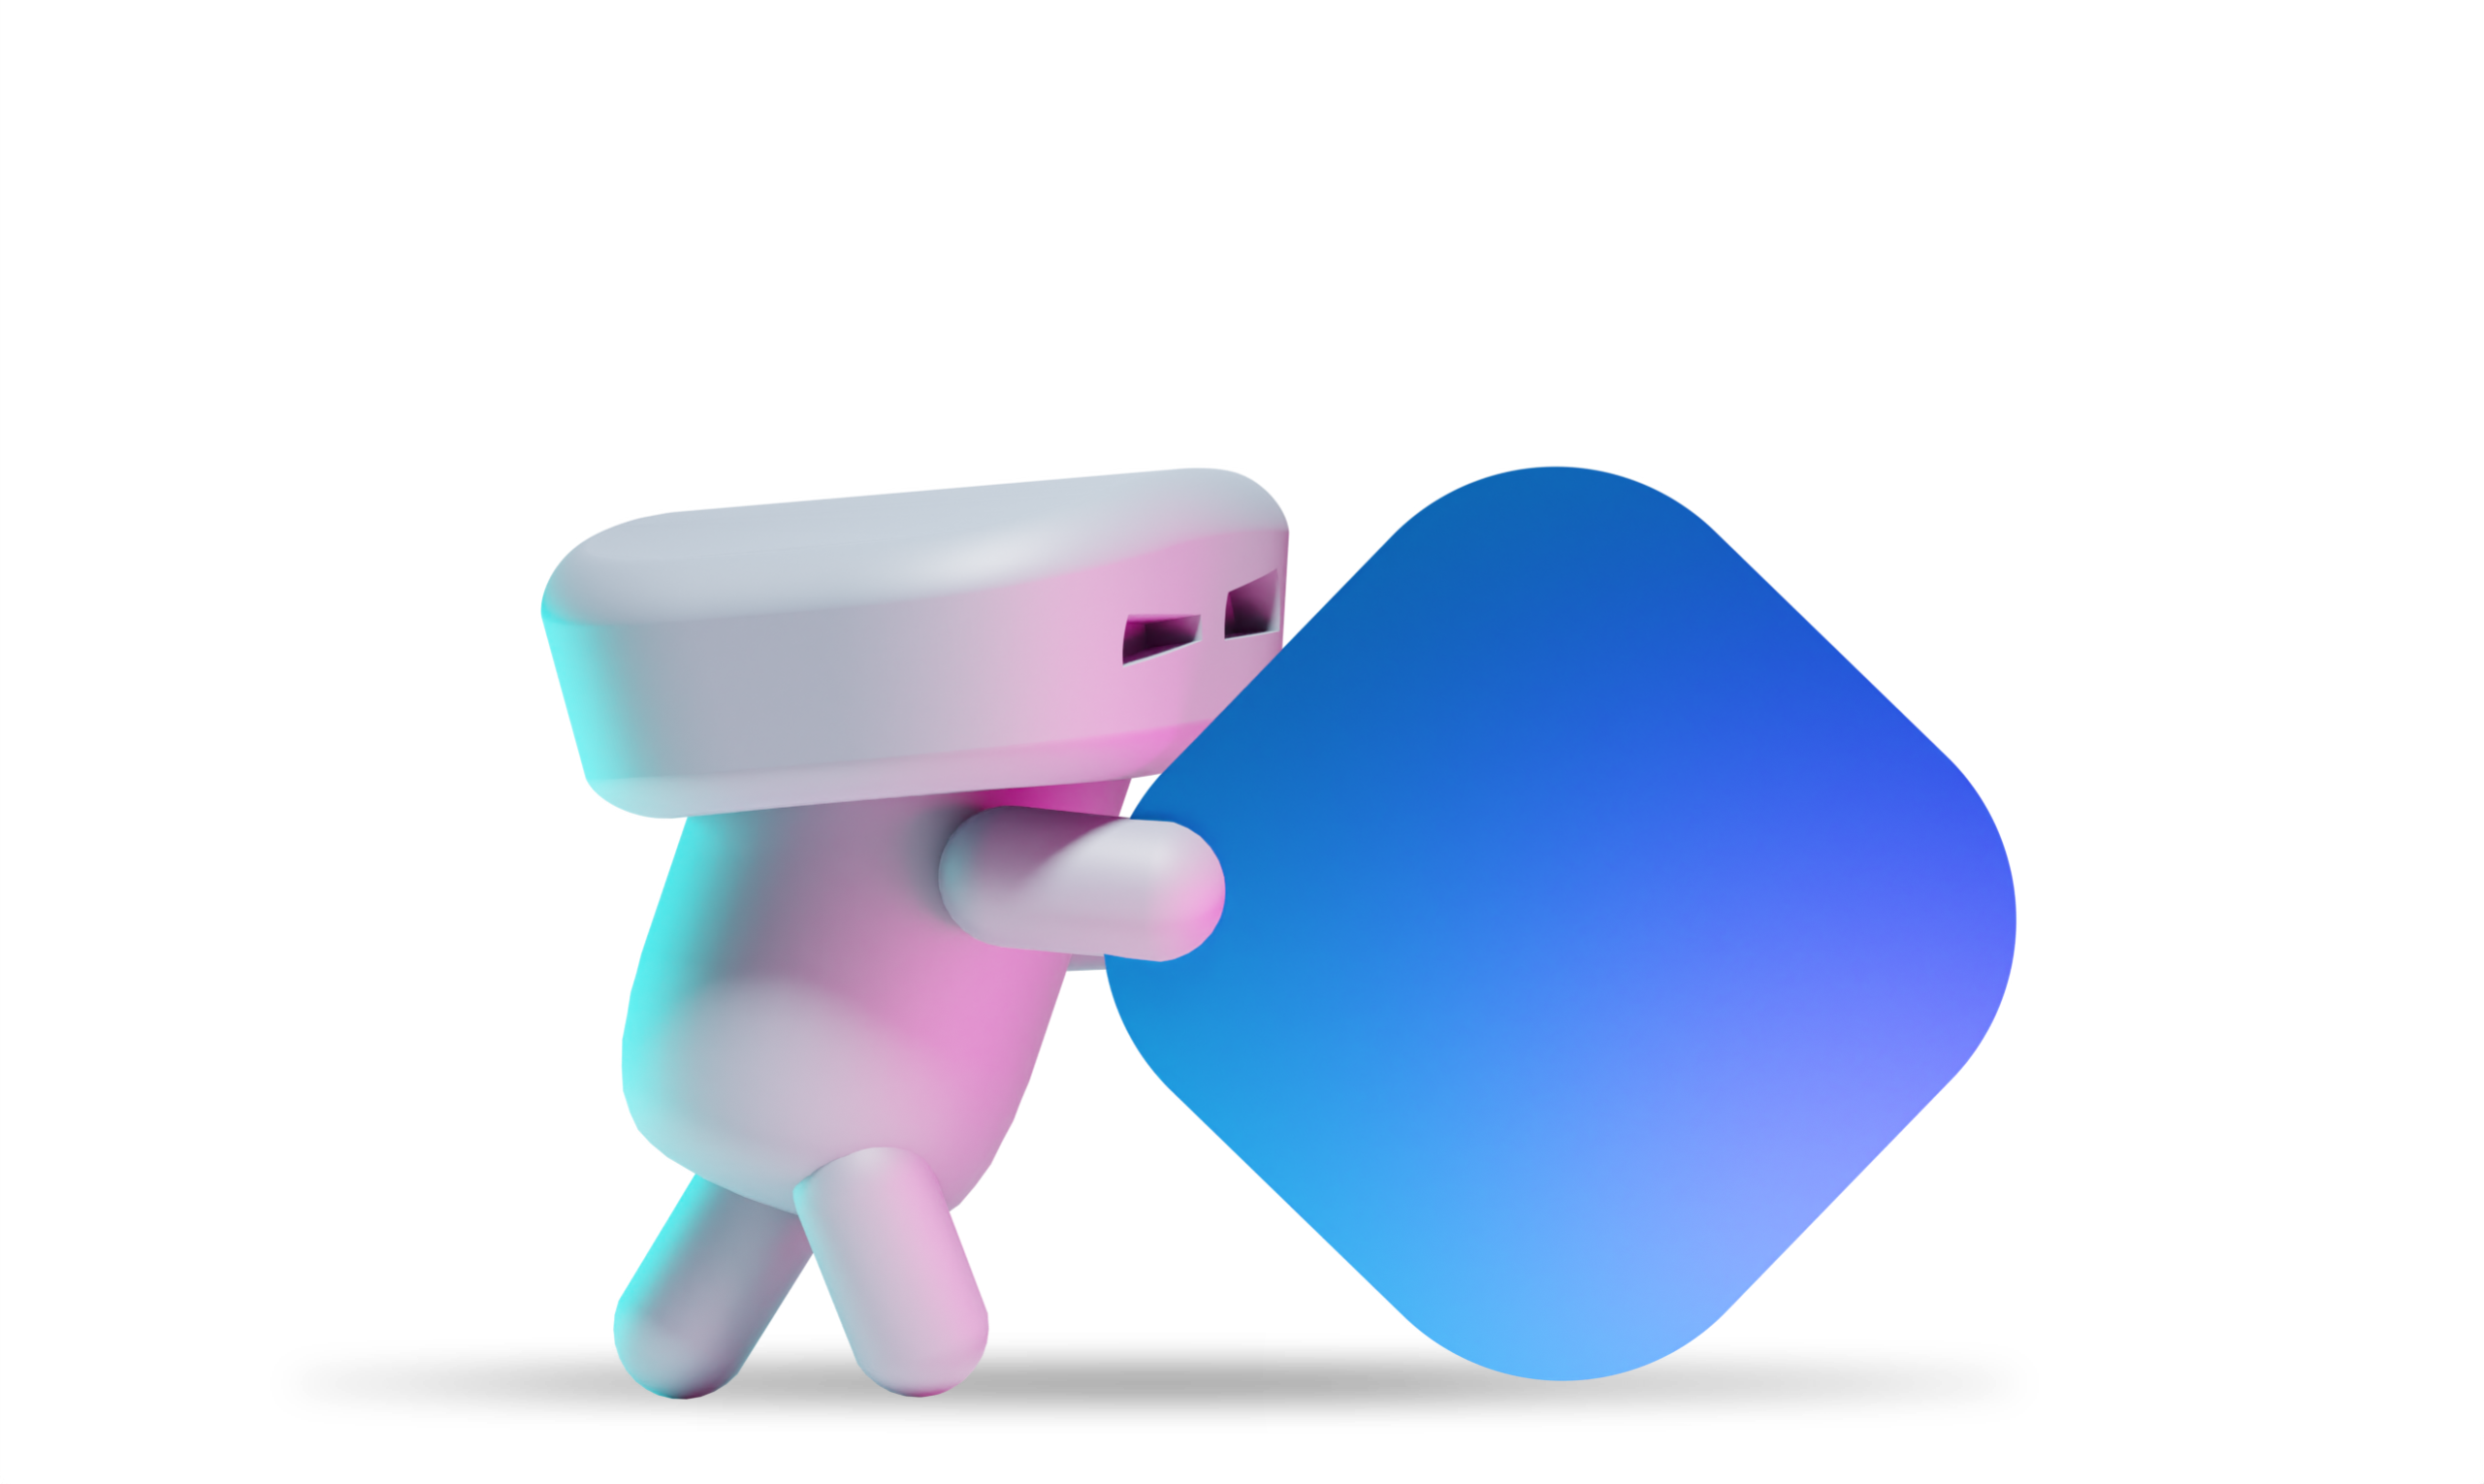 A cute 3D animated figure with pushing a rectangle